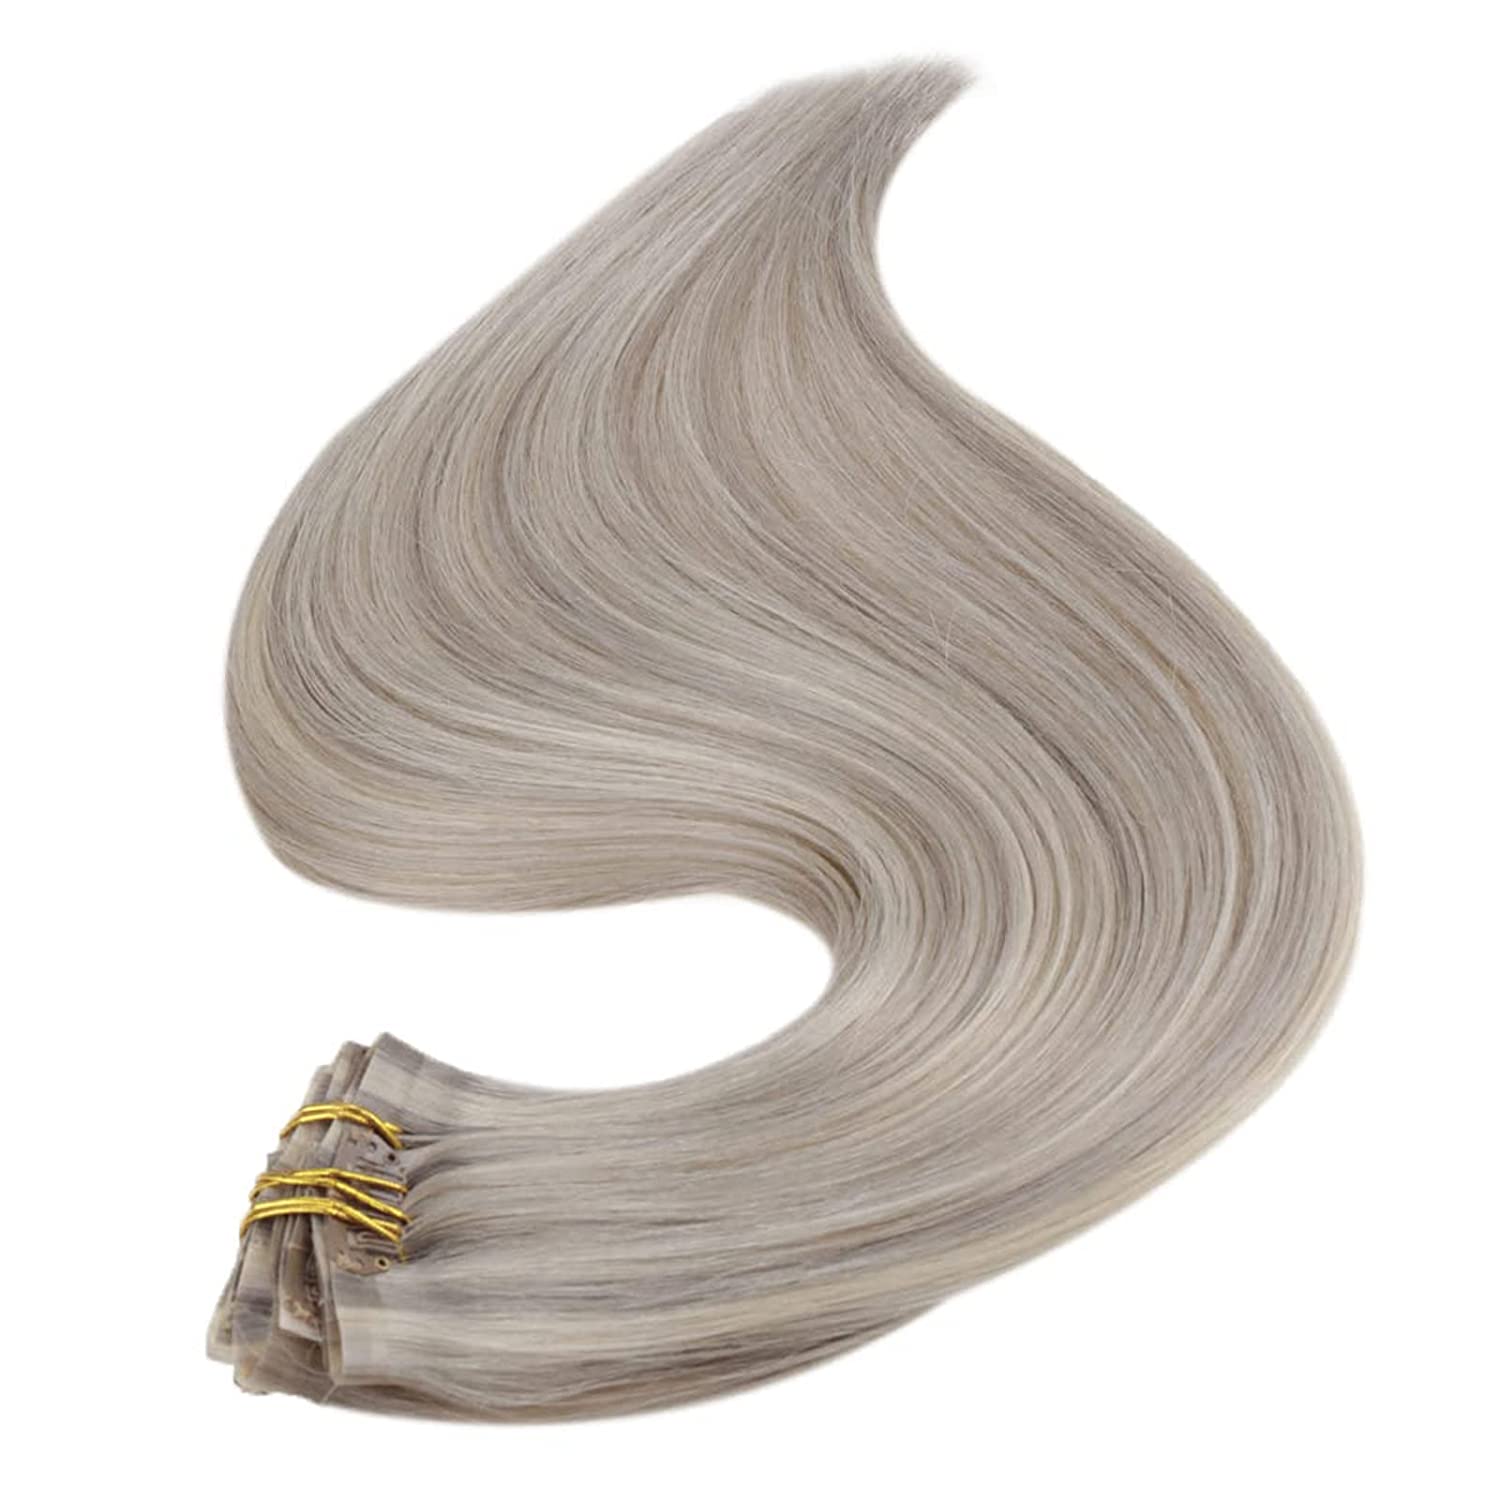 FShine PU Clip In Hair Extensions Clip in Hair Extensions #GreyP60 - FShine Shop